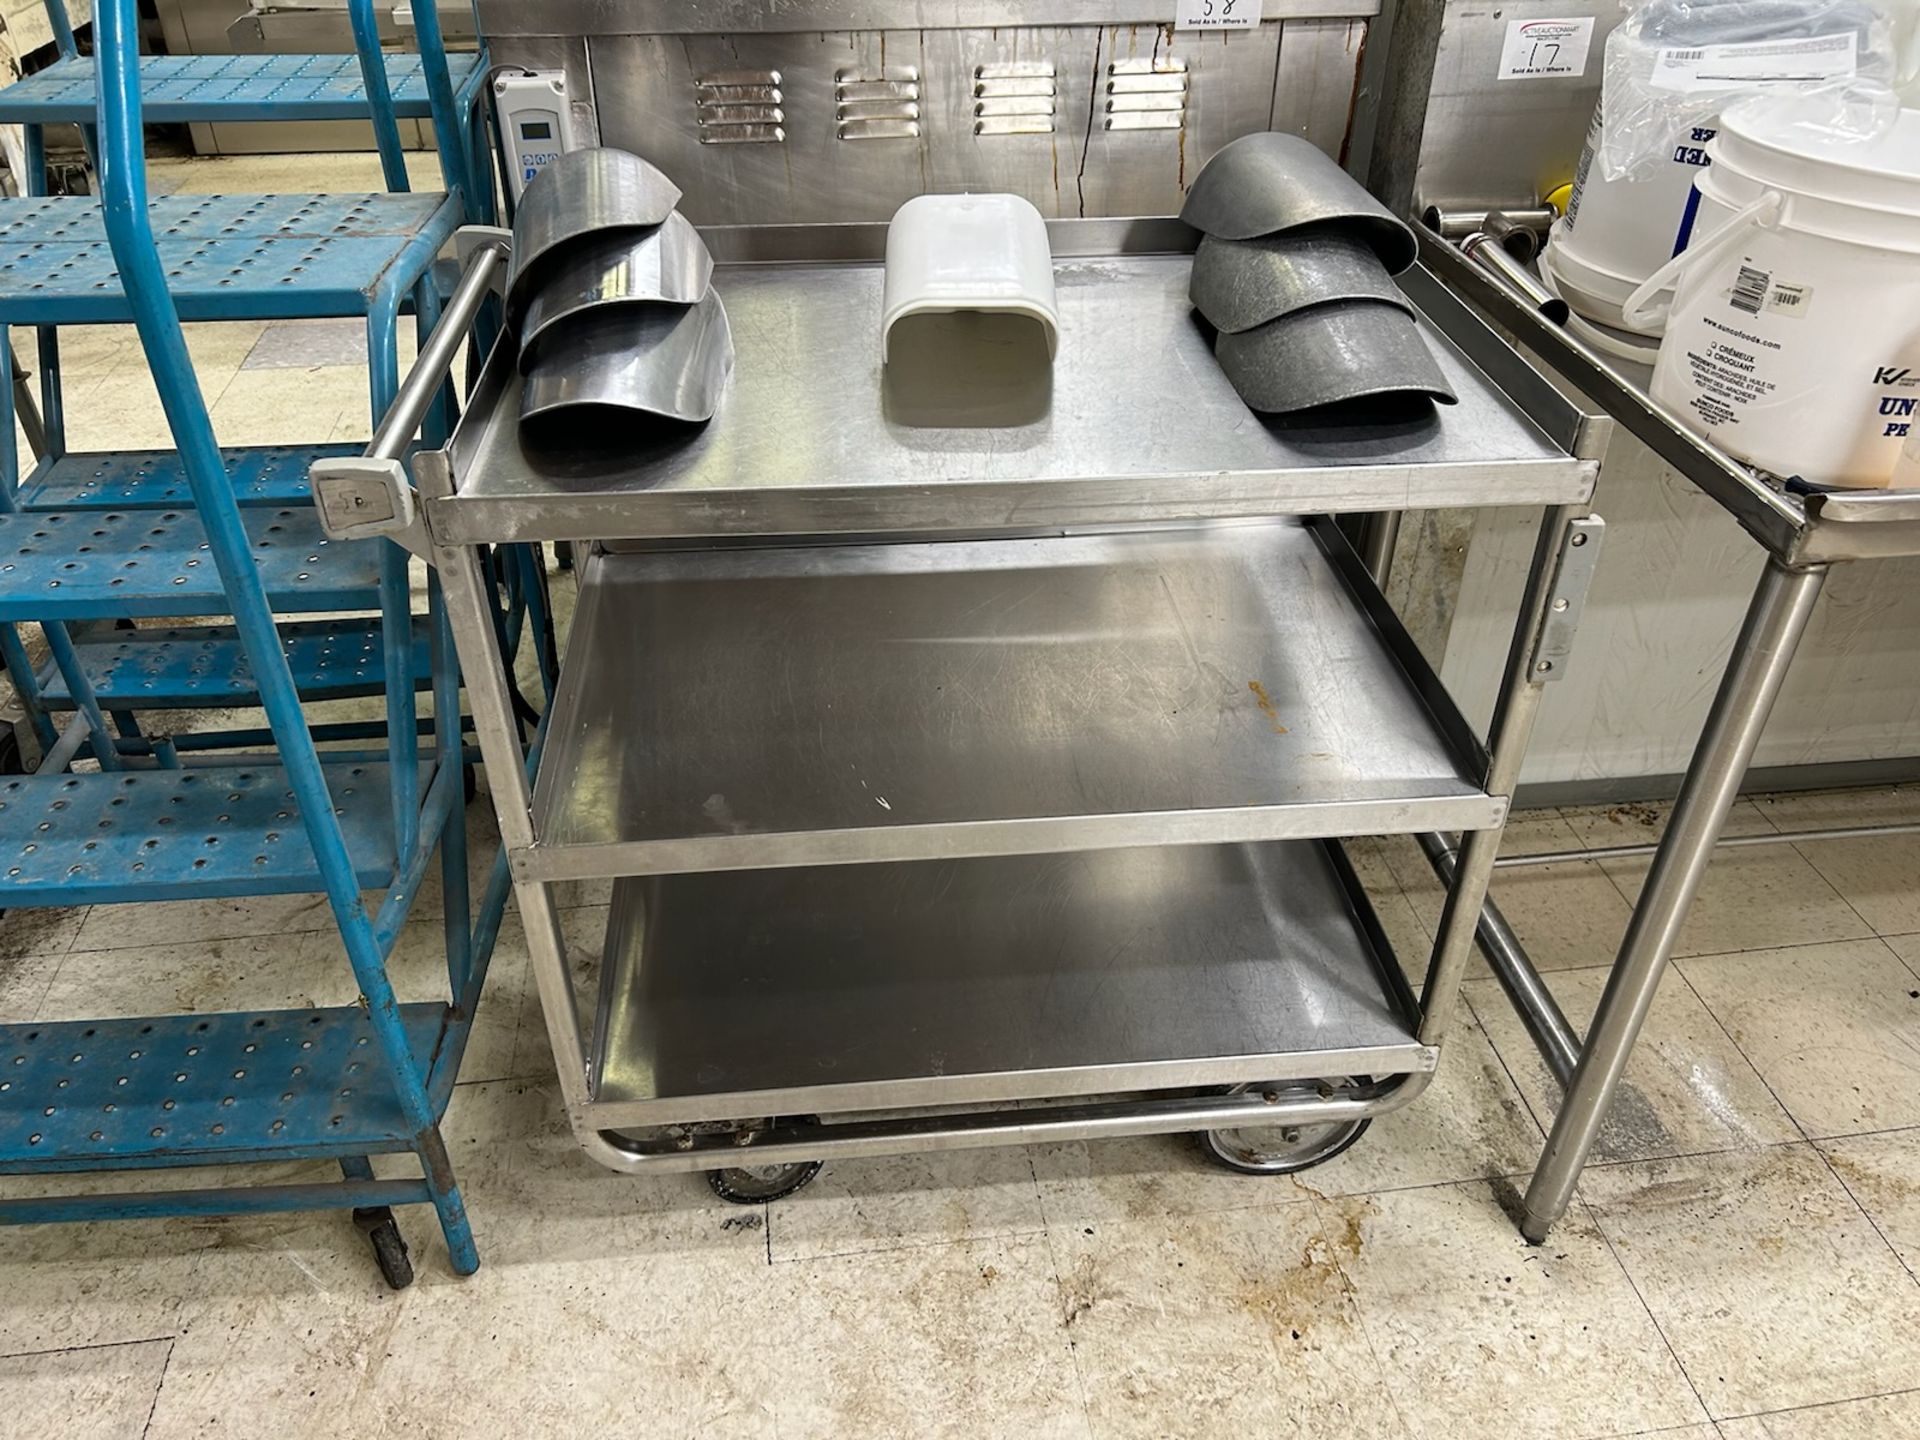 3 Tier Stainless Steel Trolley with Assorted Ingredients Scoops